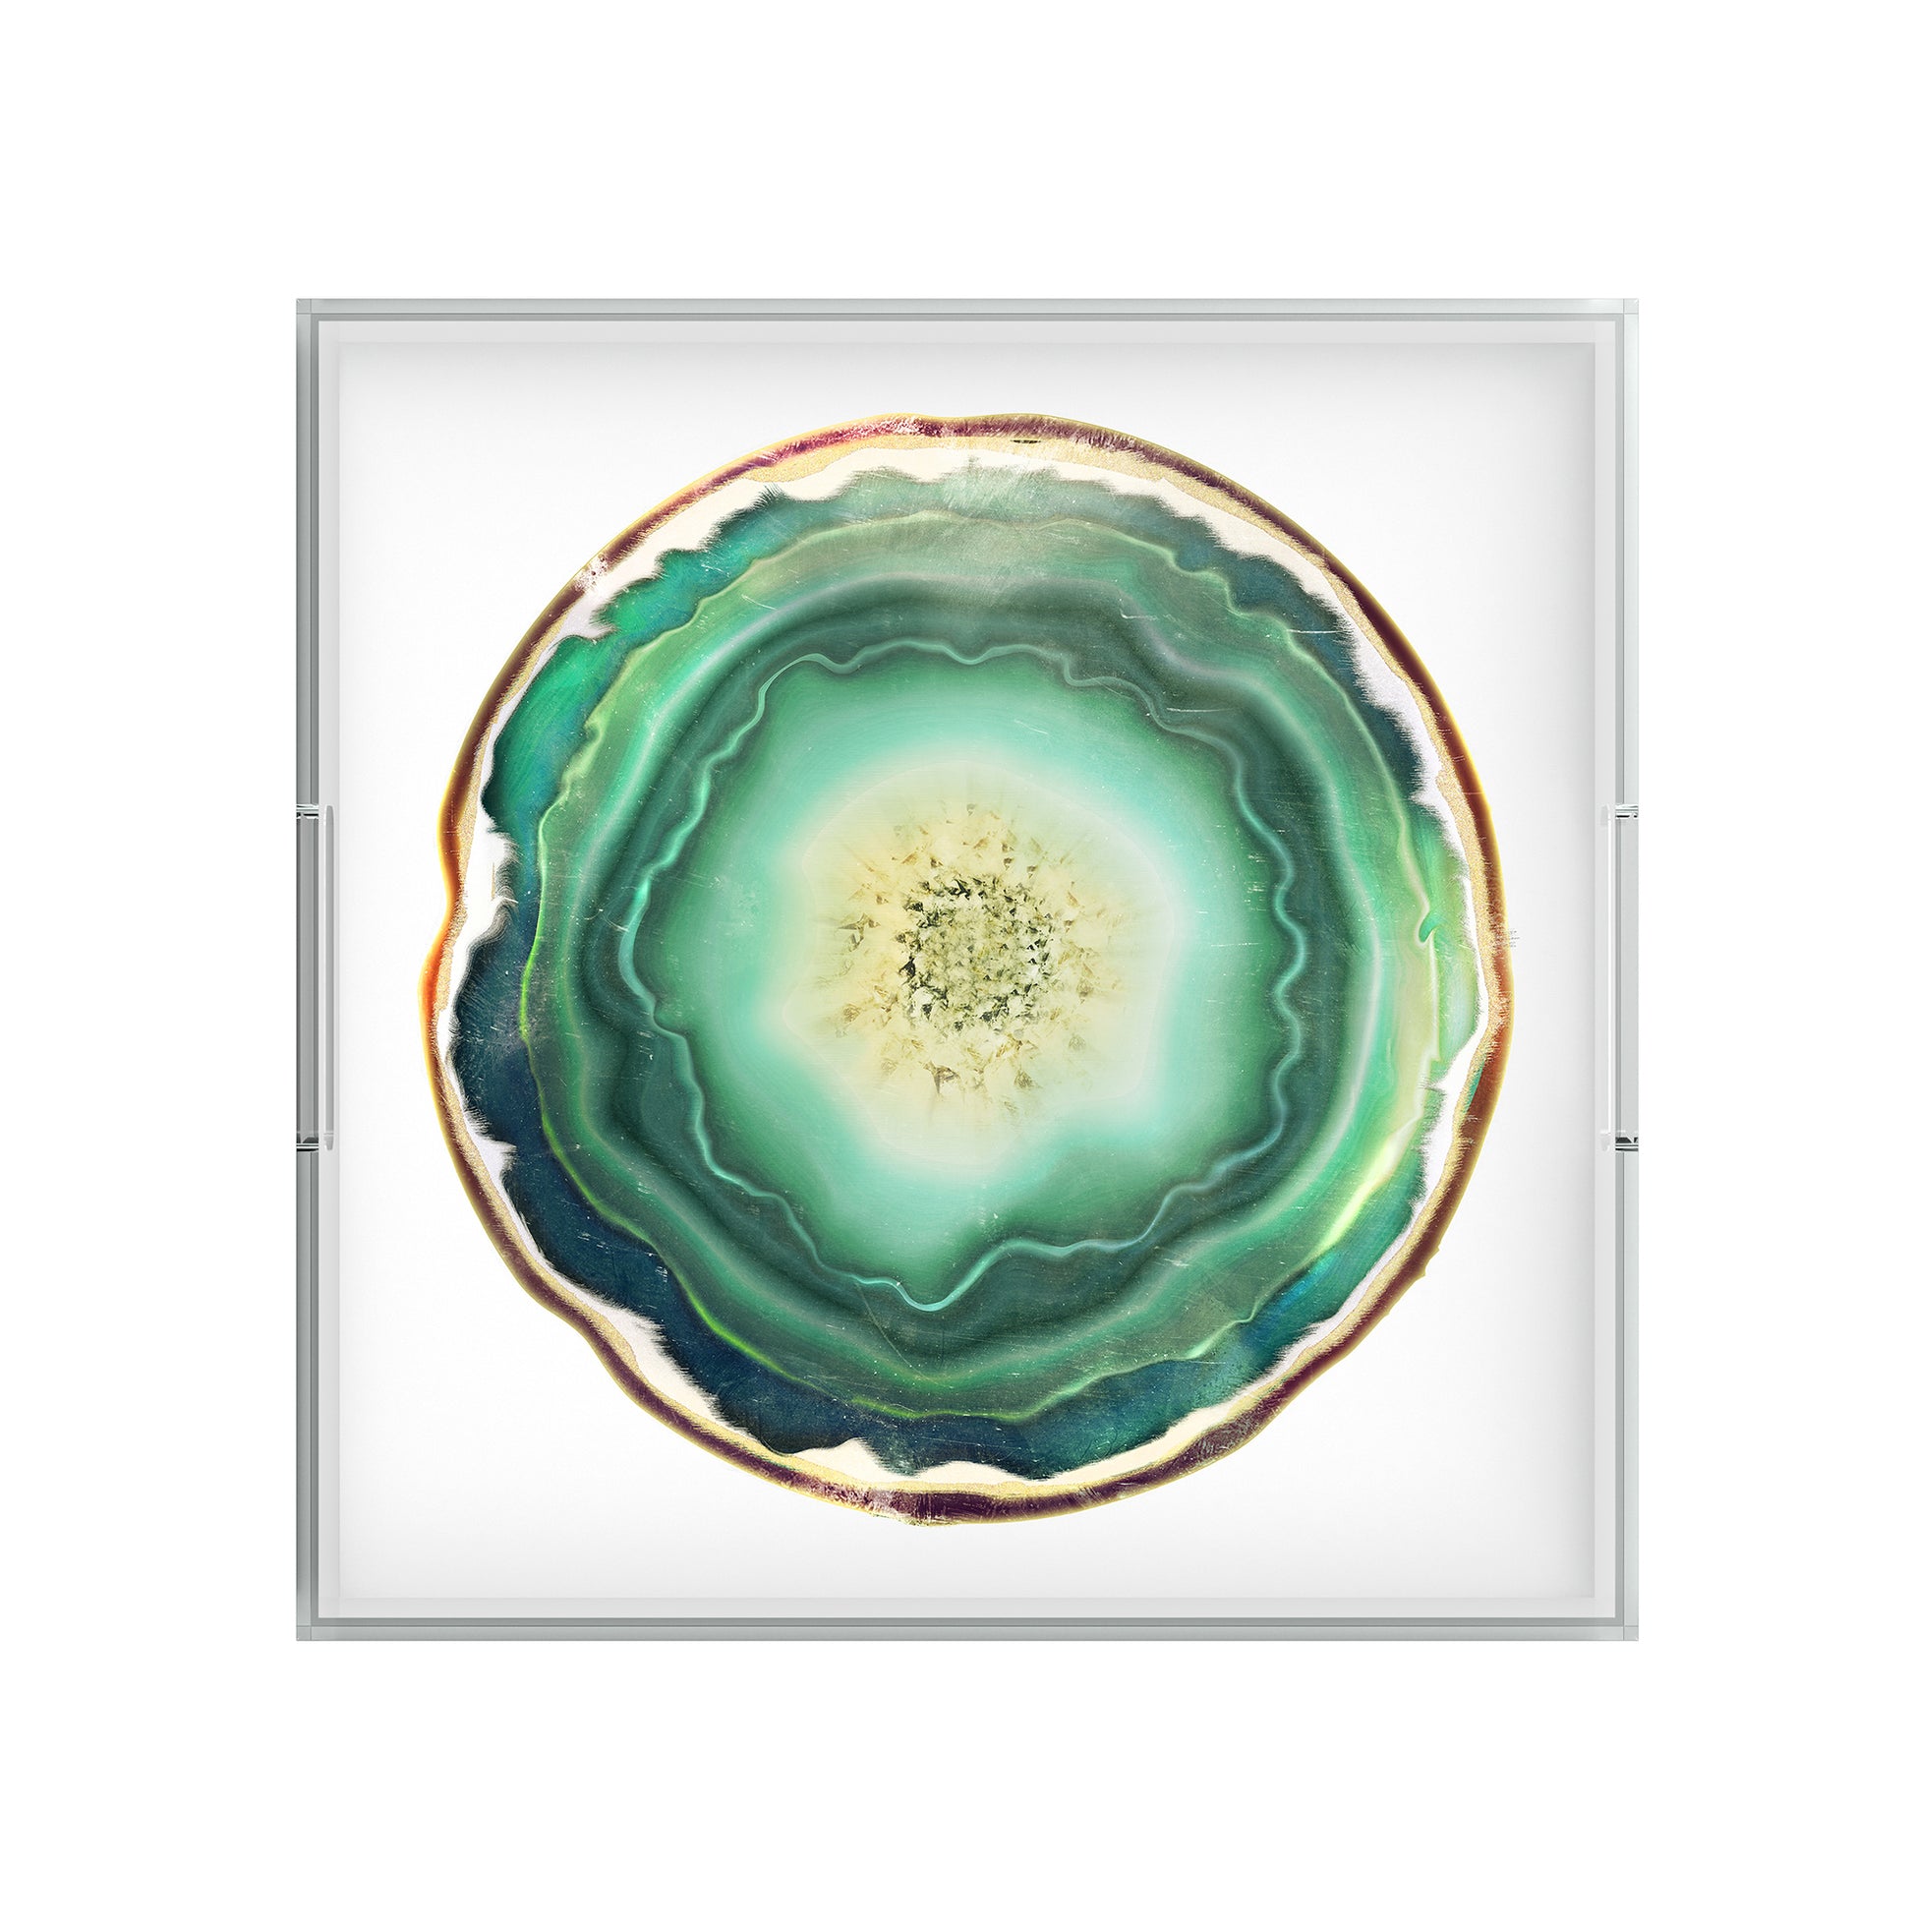 Green Agate Slice Print Lucite Acrylic Square Tray, 12" x 12"